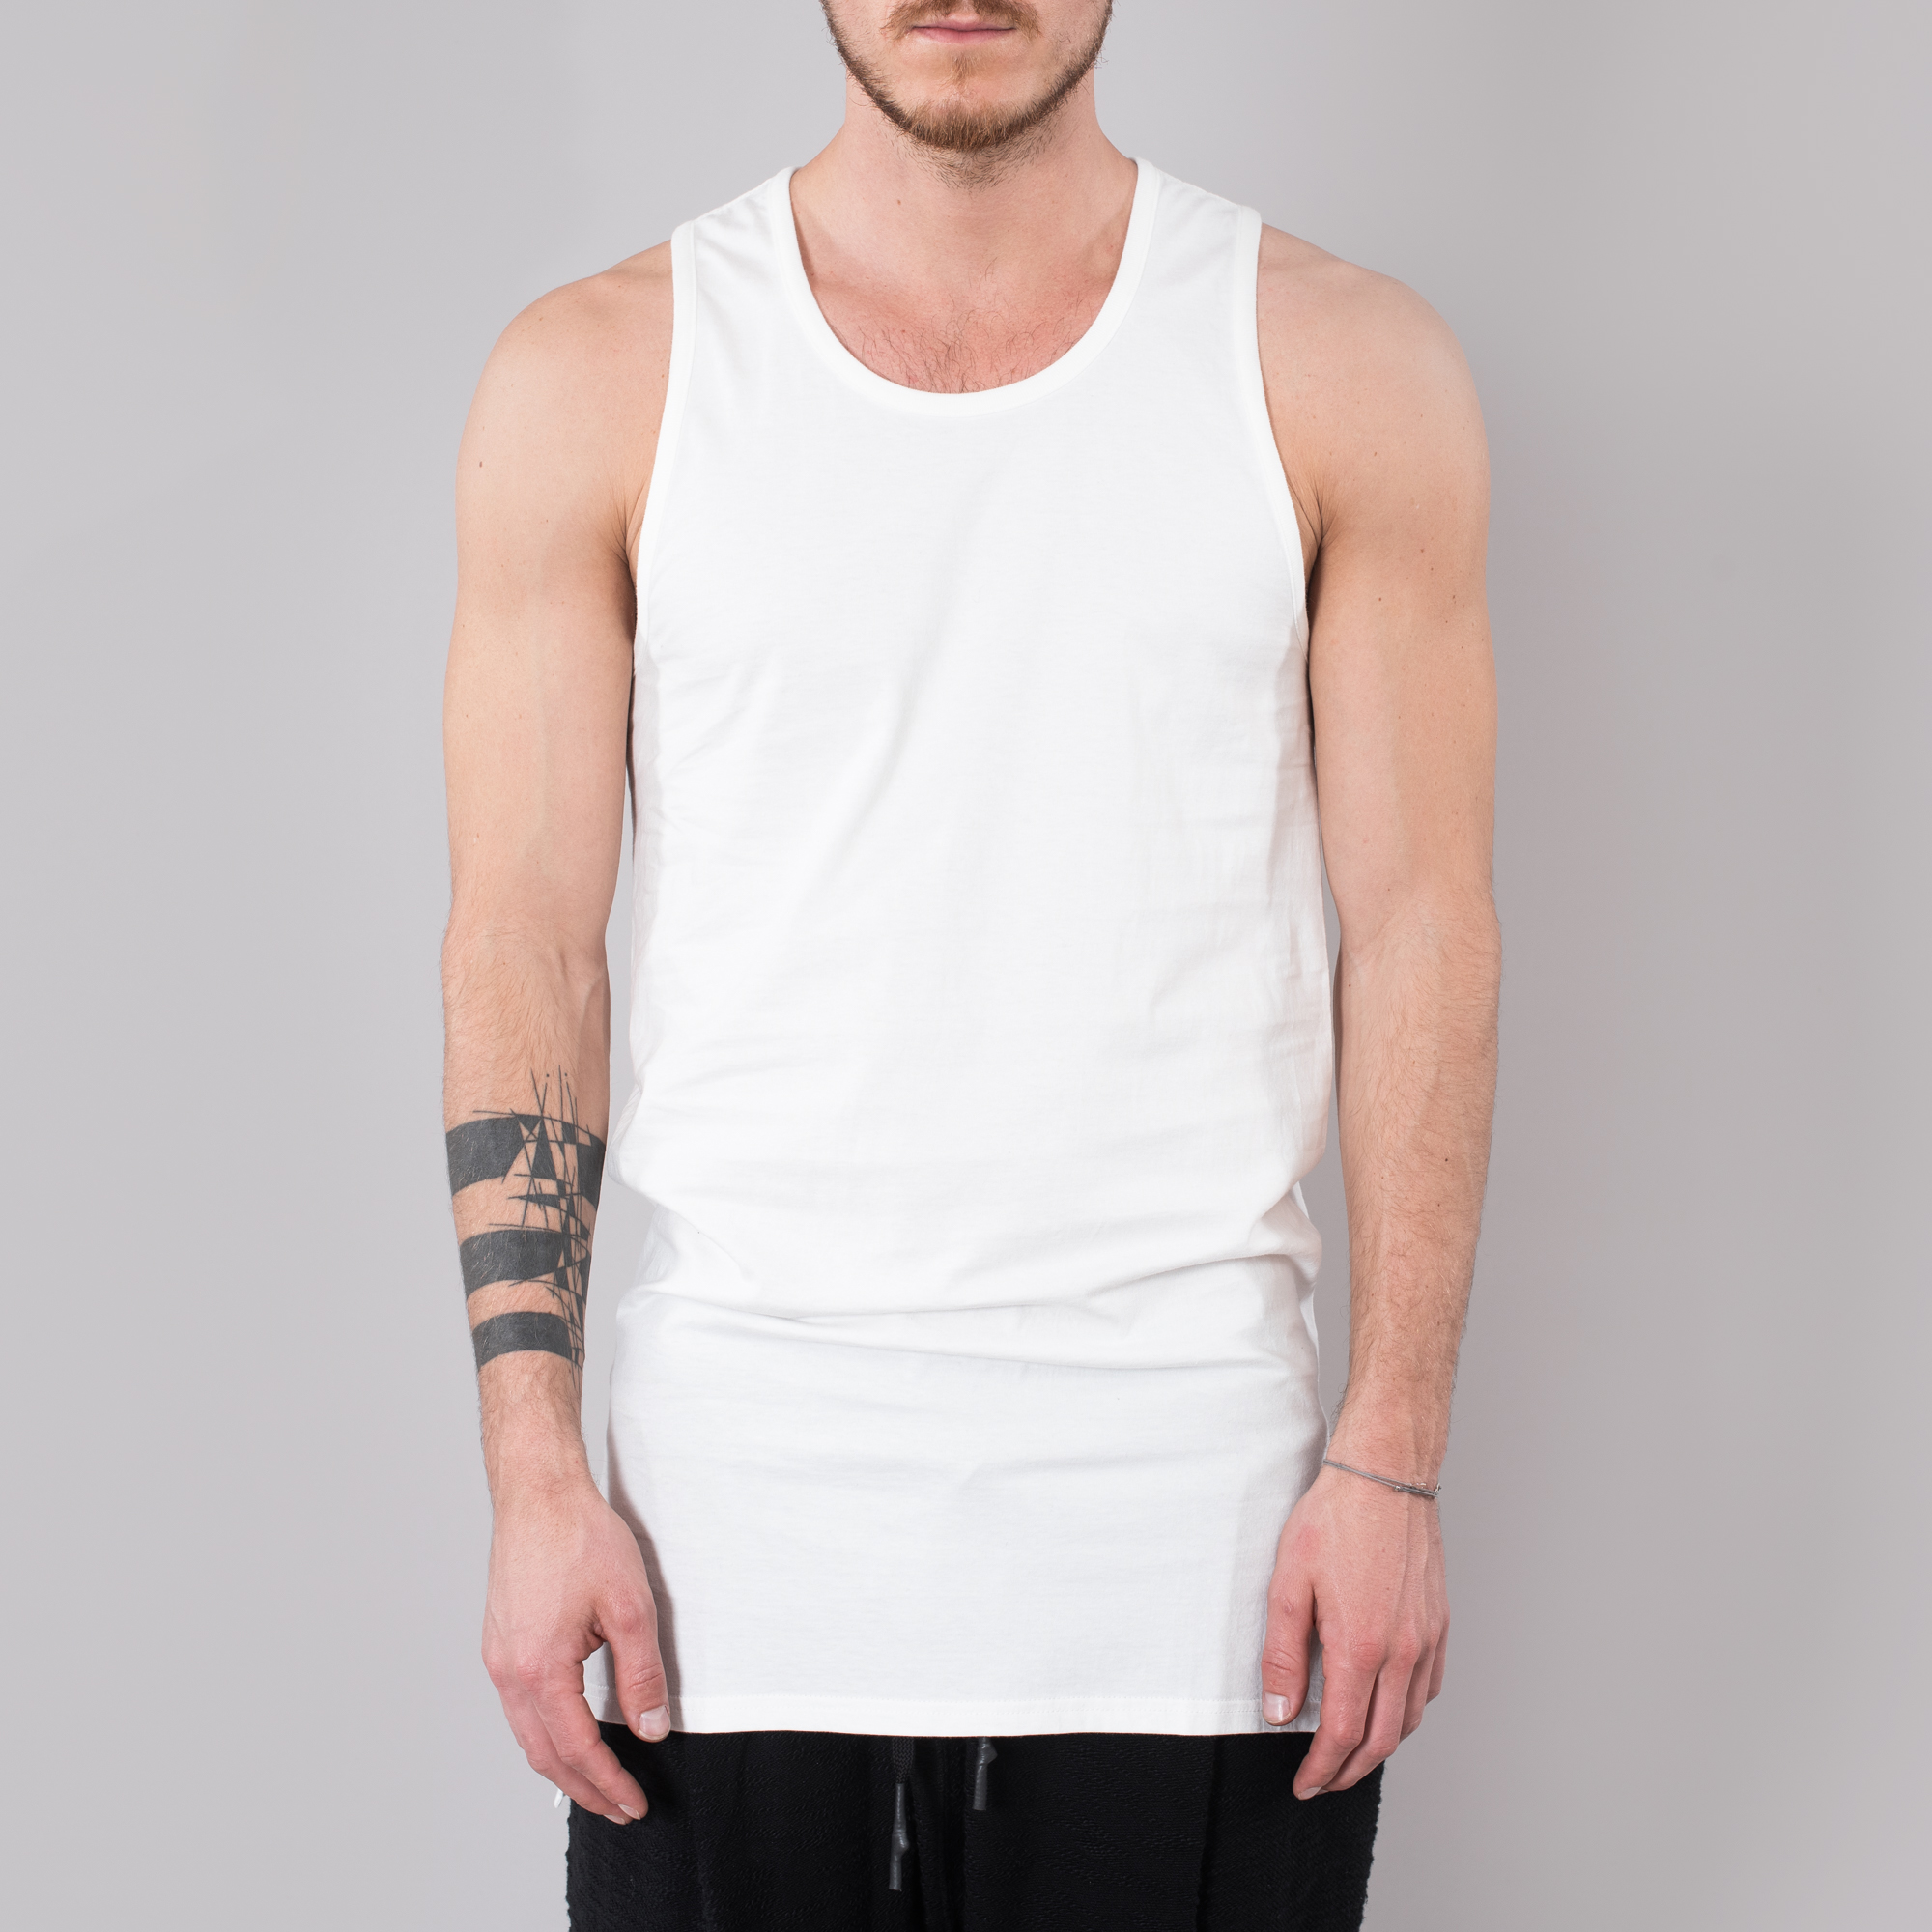 WHITE PRINTED BACK TANK TOP|wolfensson